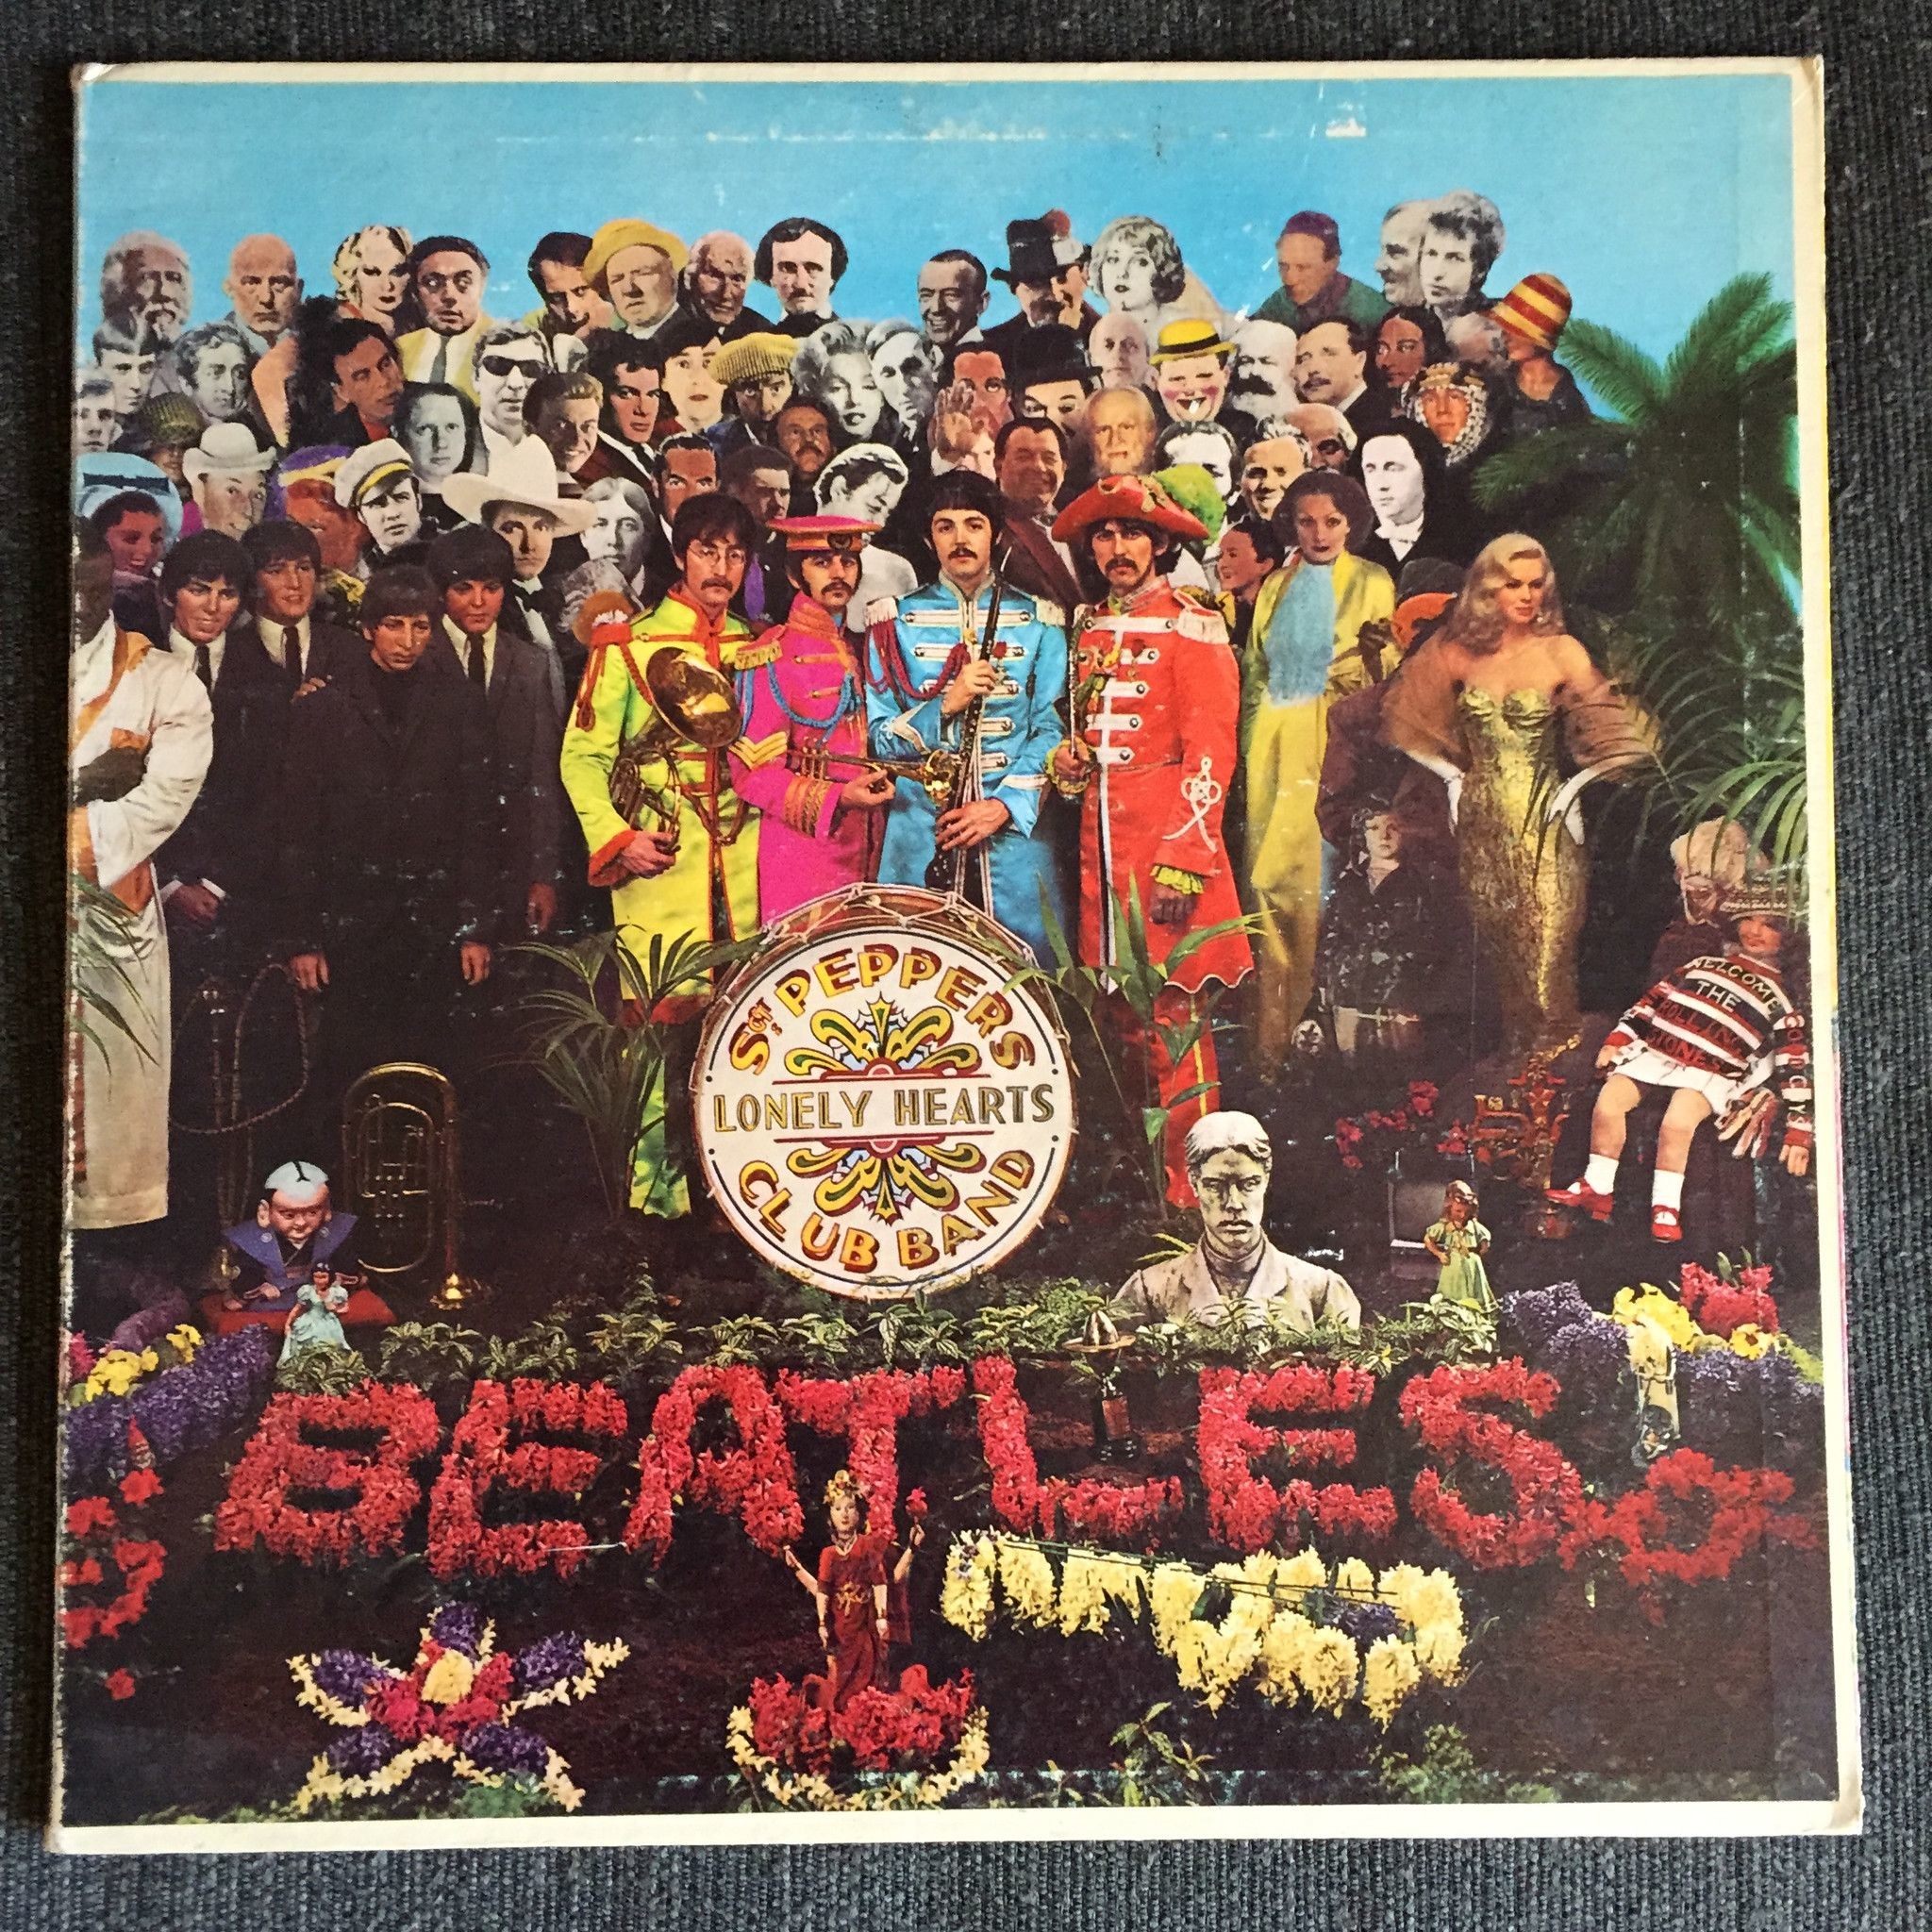 2048x2048 Beatles - Sgt. Peppers Lonely Hearts Club Band (Used LP)